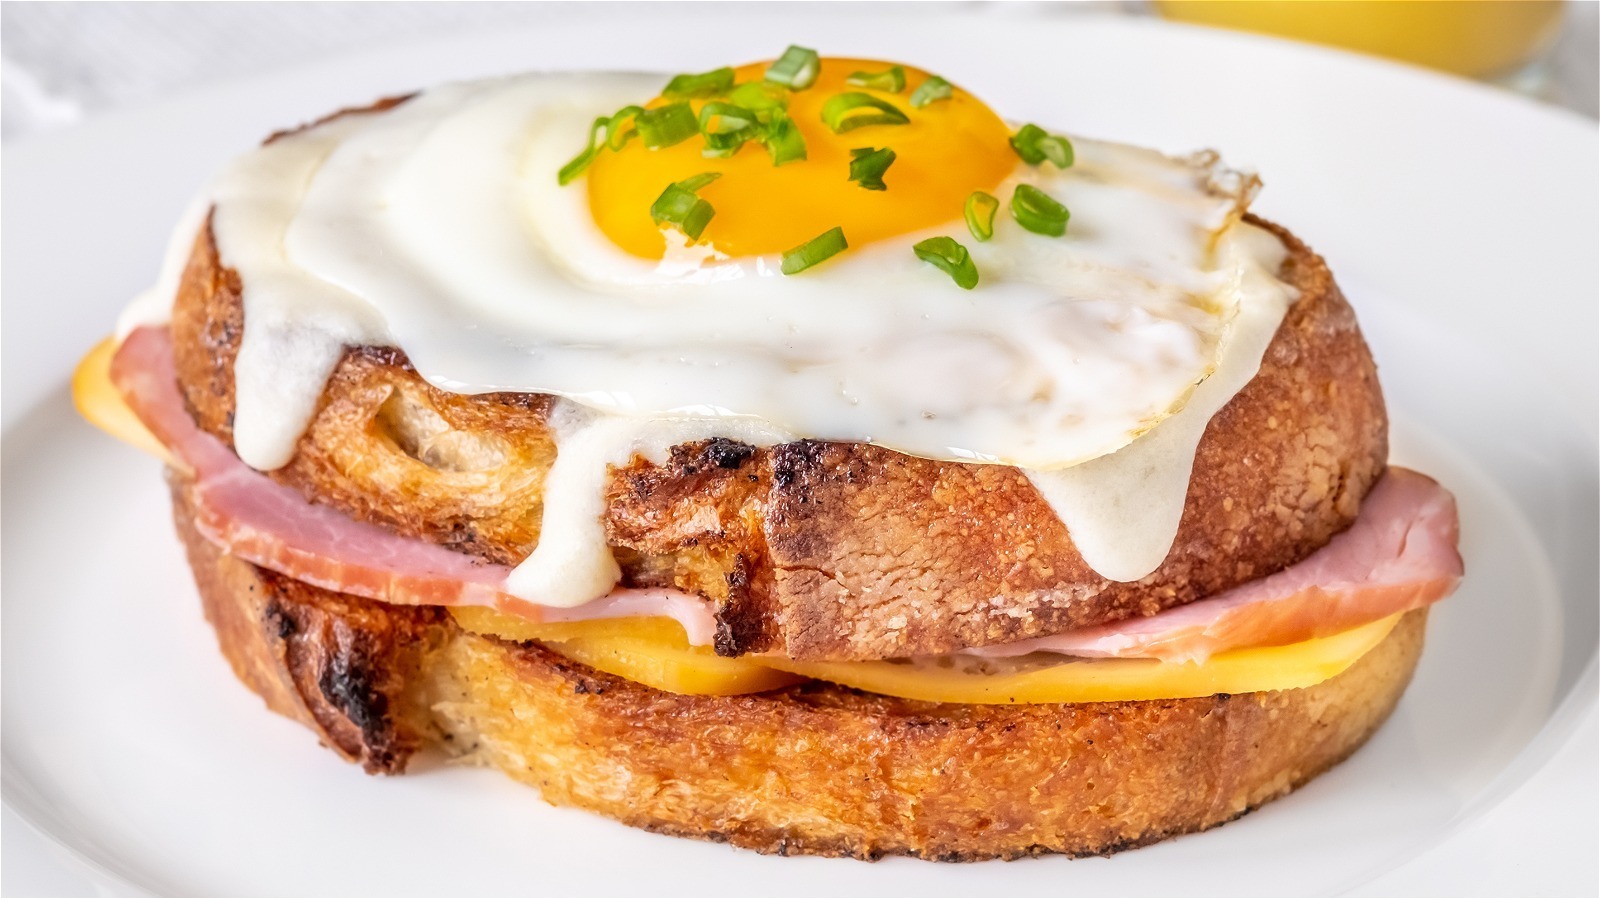 Switching Up Your Croque Madame Means Using A Once-Stale Baked Good